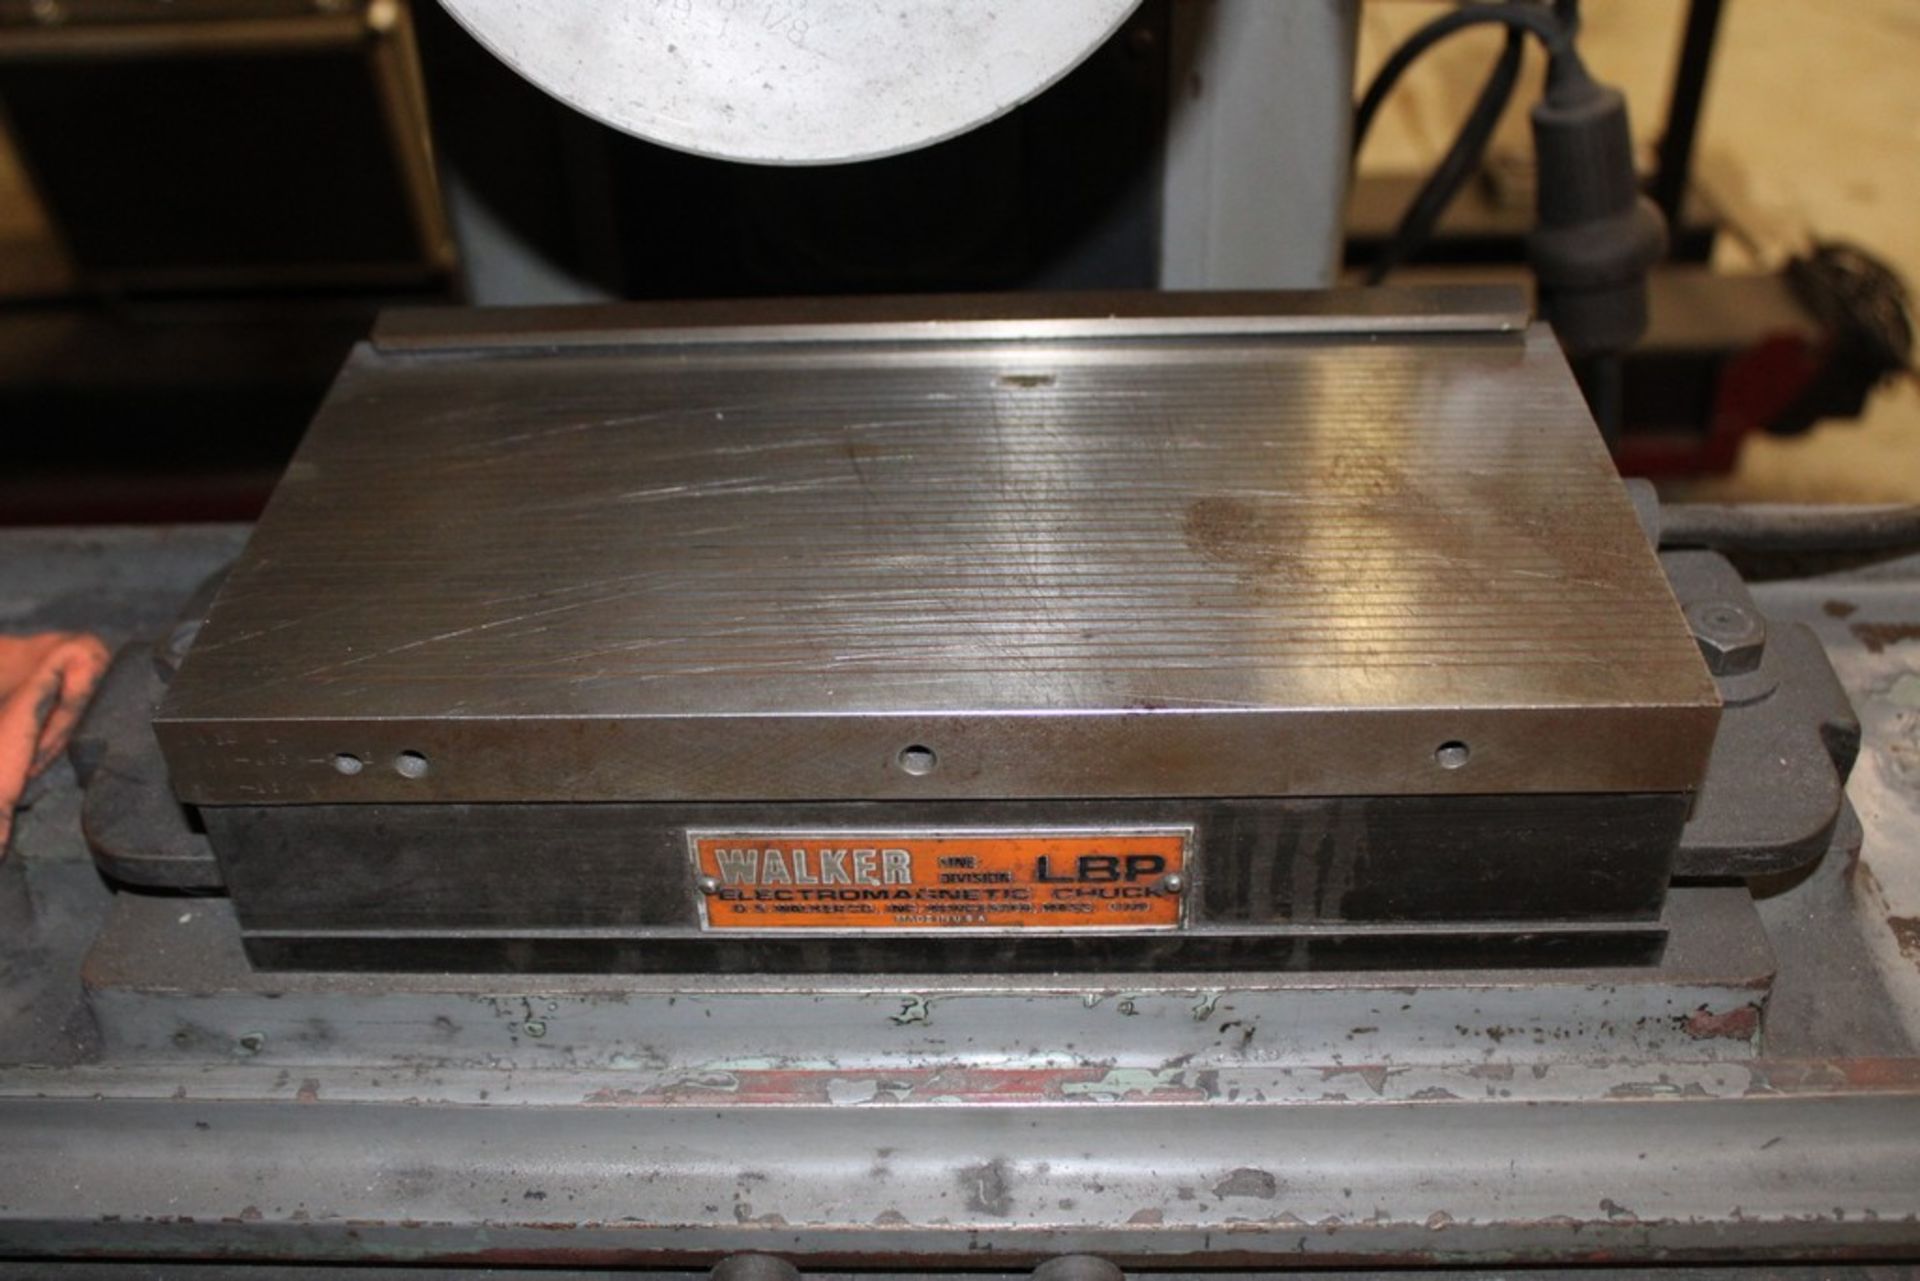 YUASA MODEL RX-614 6" X 12" HAND FEED SURFACE GRINDER WITH WALKER FINE LBP ELECTROMAGNETIC CHUCK, - Image 6 of 6